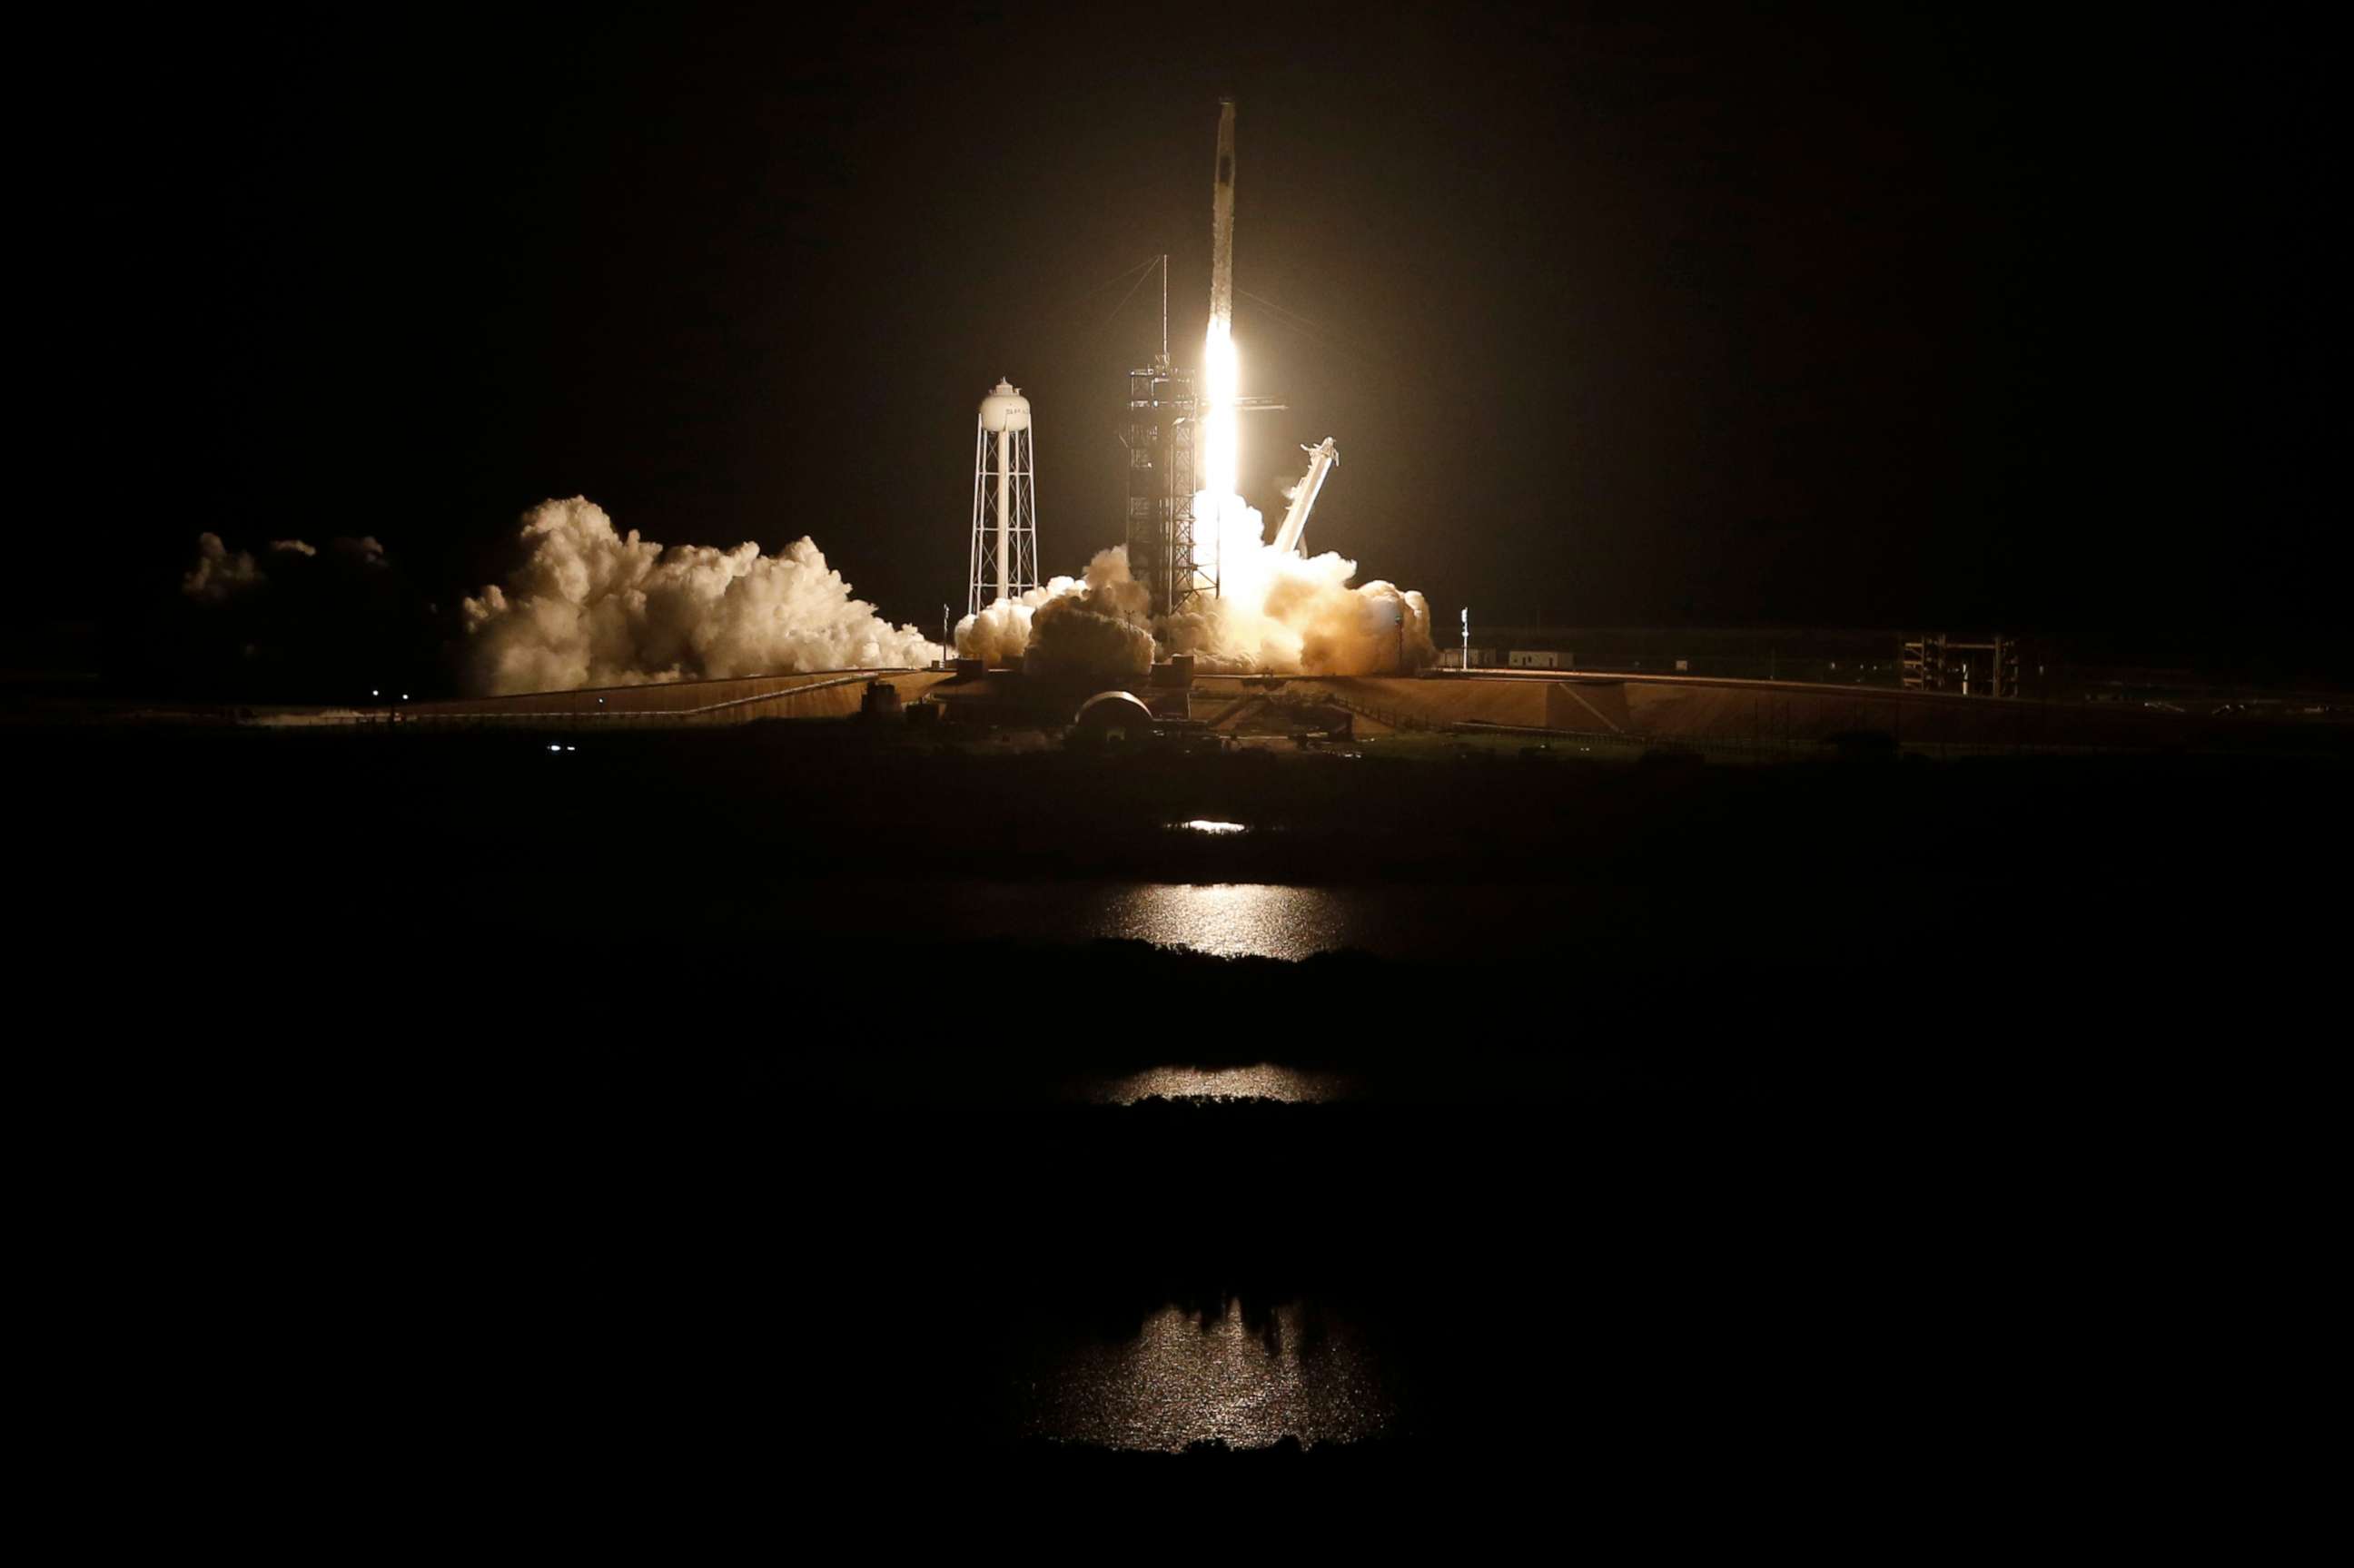 PHOTO: A SpaceX Falcon 9 rocket,  with the Crew Dragon capsule, is launched carrying four astronauts on a NASA commercial crew mission to the International Space Station at Kennedy Space Center in Cape Canaveral, Fla., April 23, 2021.